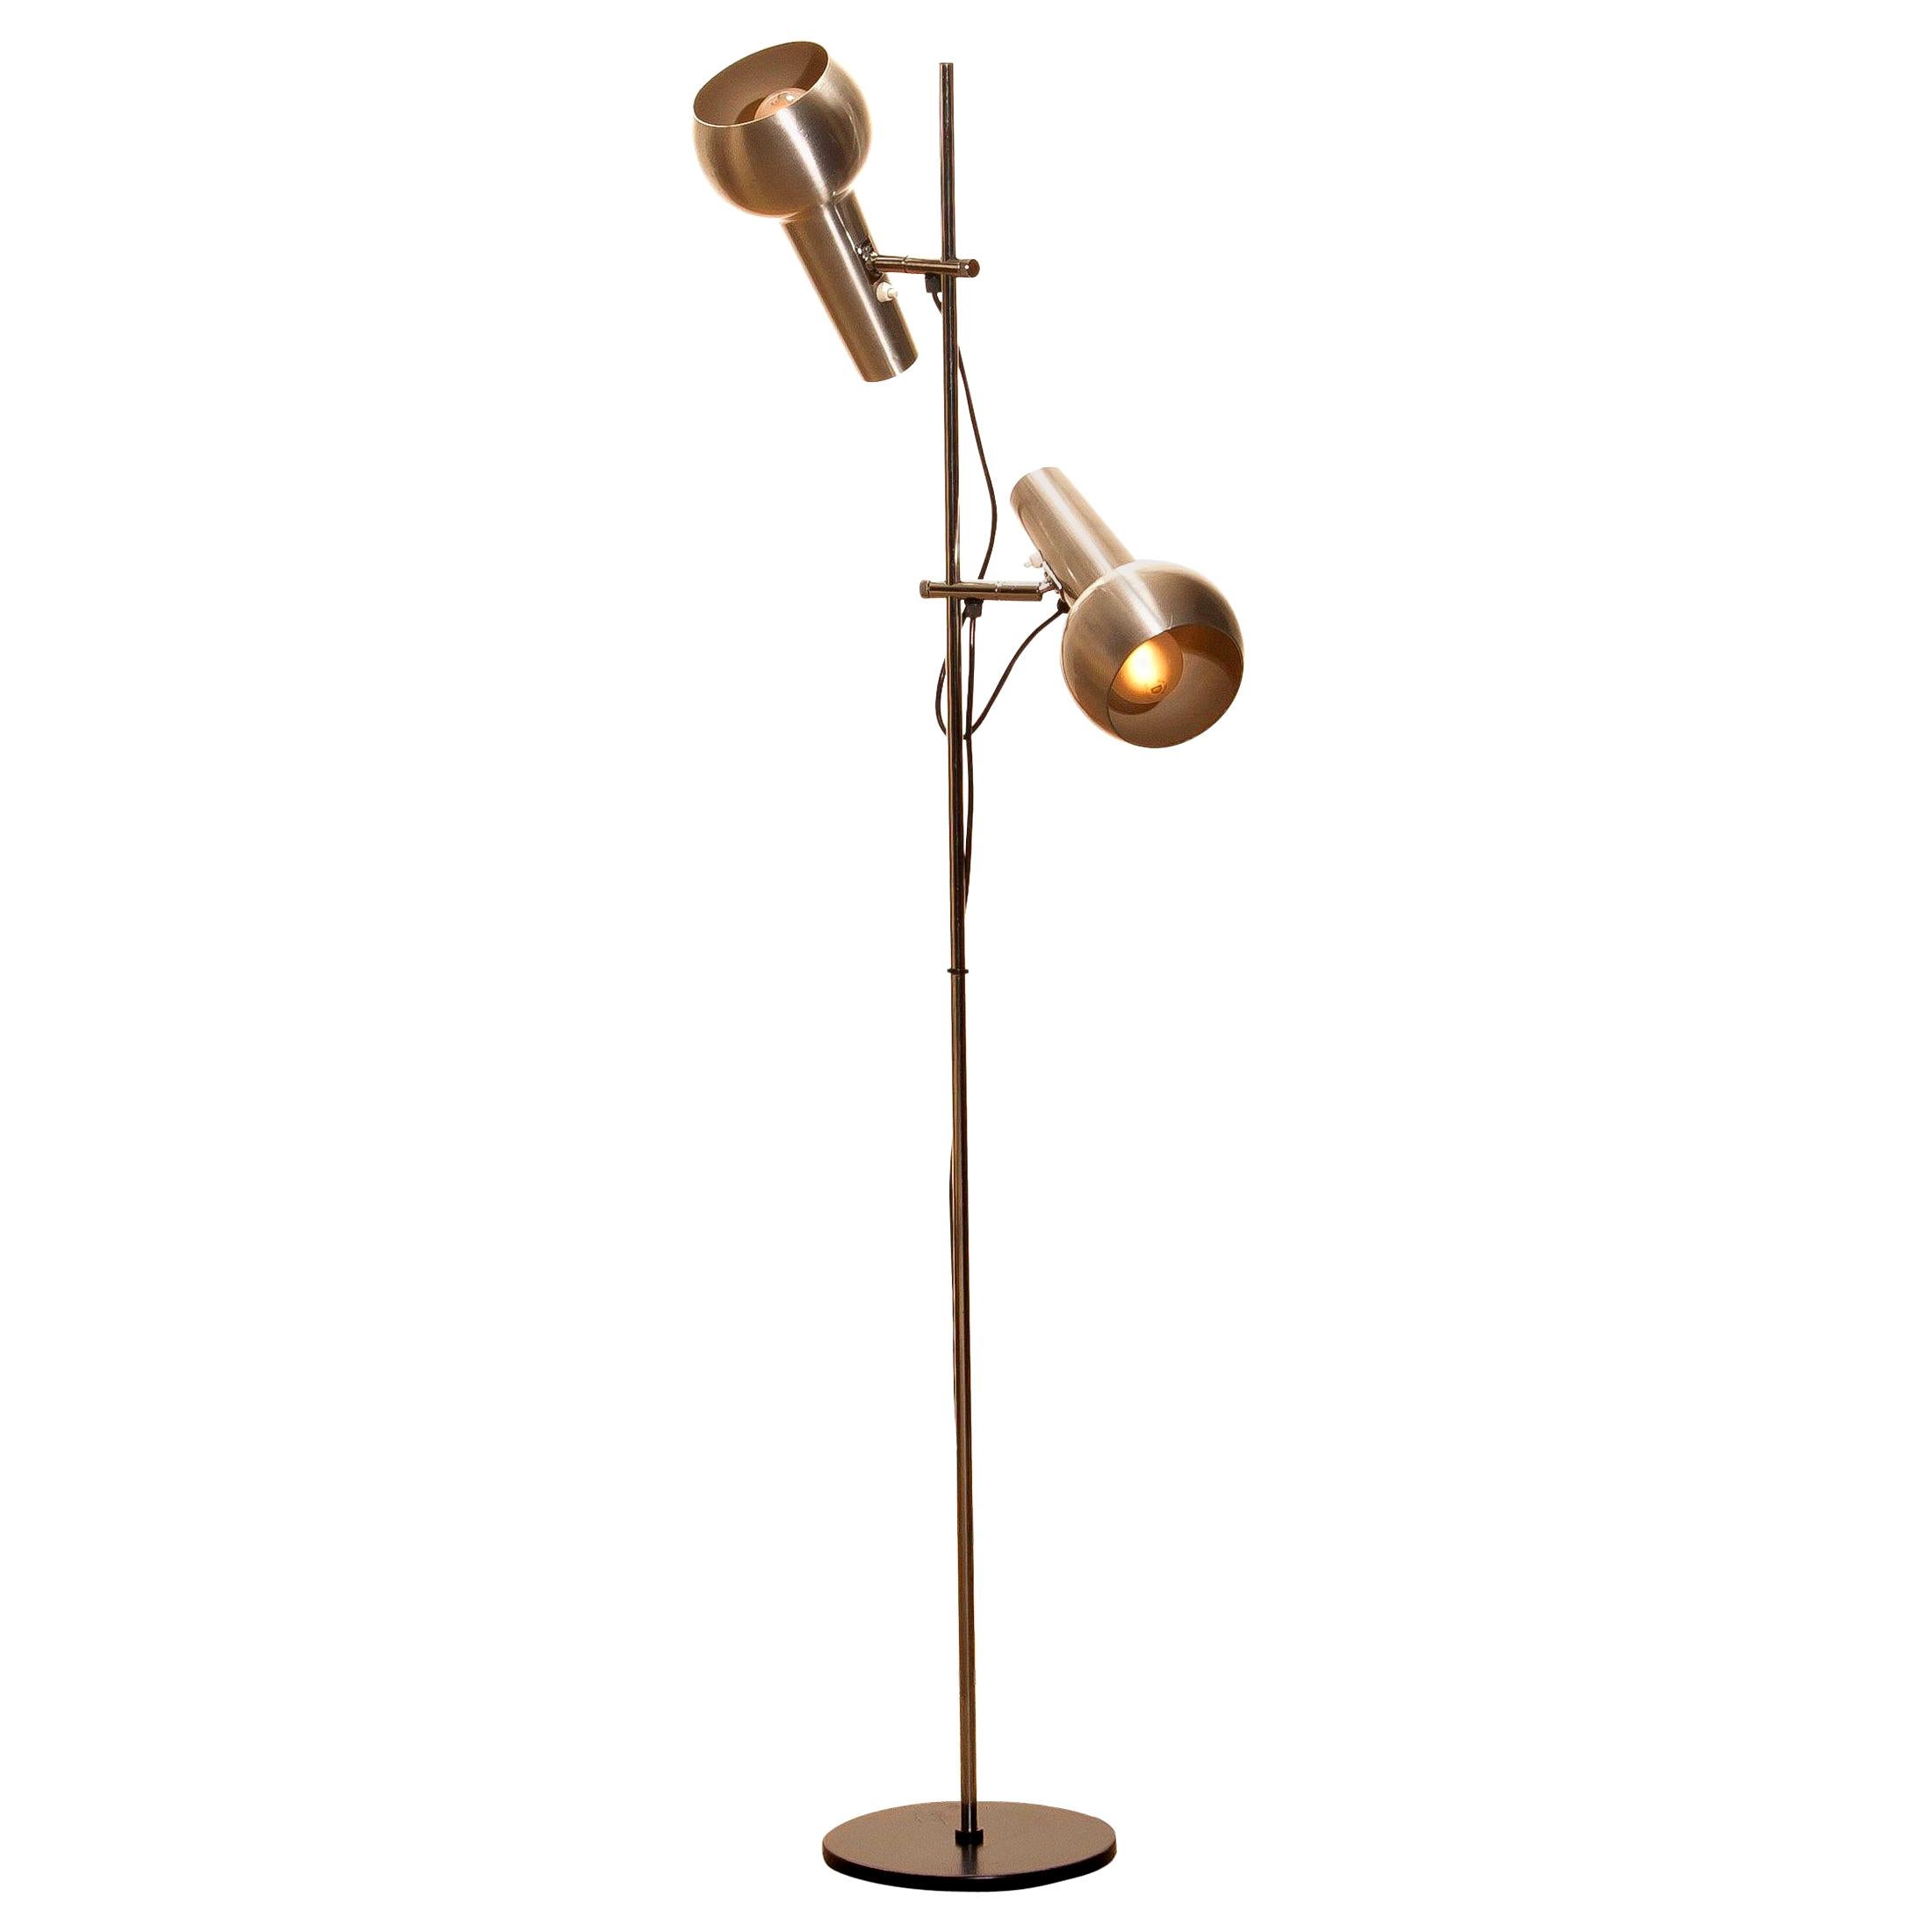 1970s, Chrome and Aluminum Double Shade Floor Lamp by Koch & Lowy